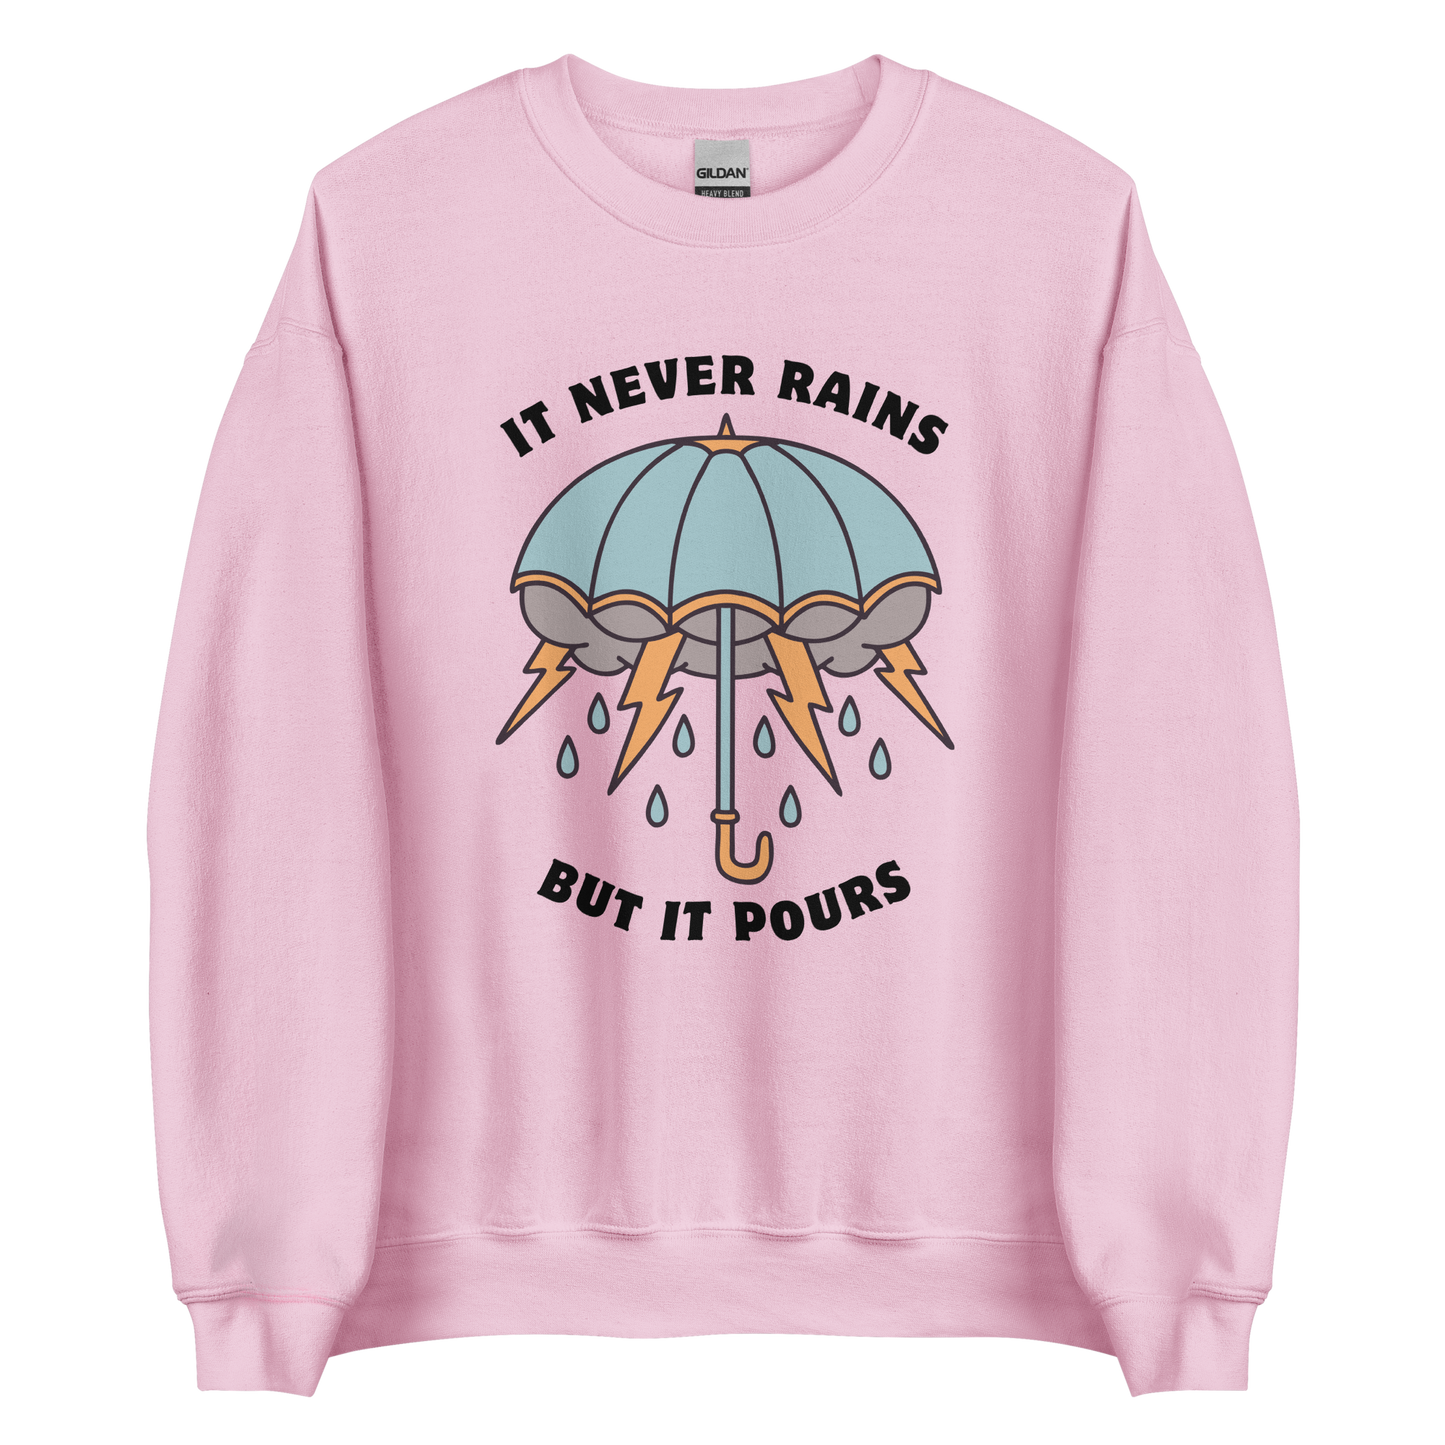 Light Pink Umbrella Sweatshirt featuring a unique It Never Rains But It Pours graphic on the chest - Cool Tattoo-Inspired Graphic Umbrella Sweatshirts - Boozy Fox